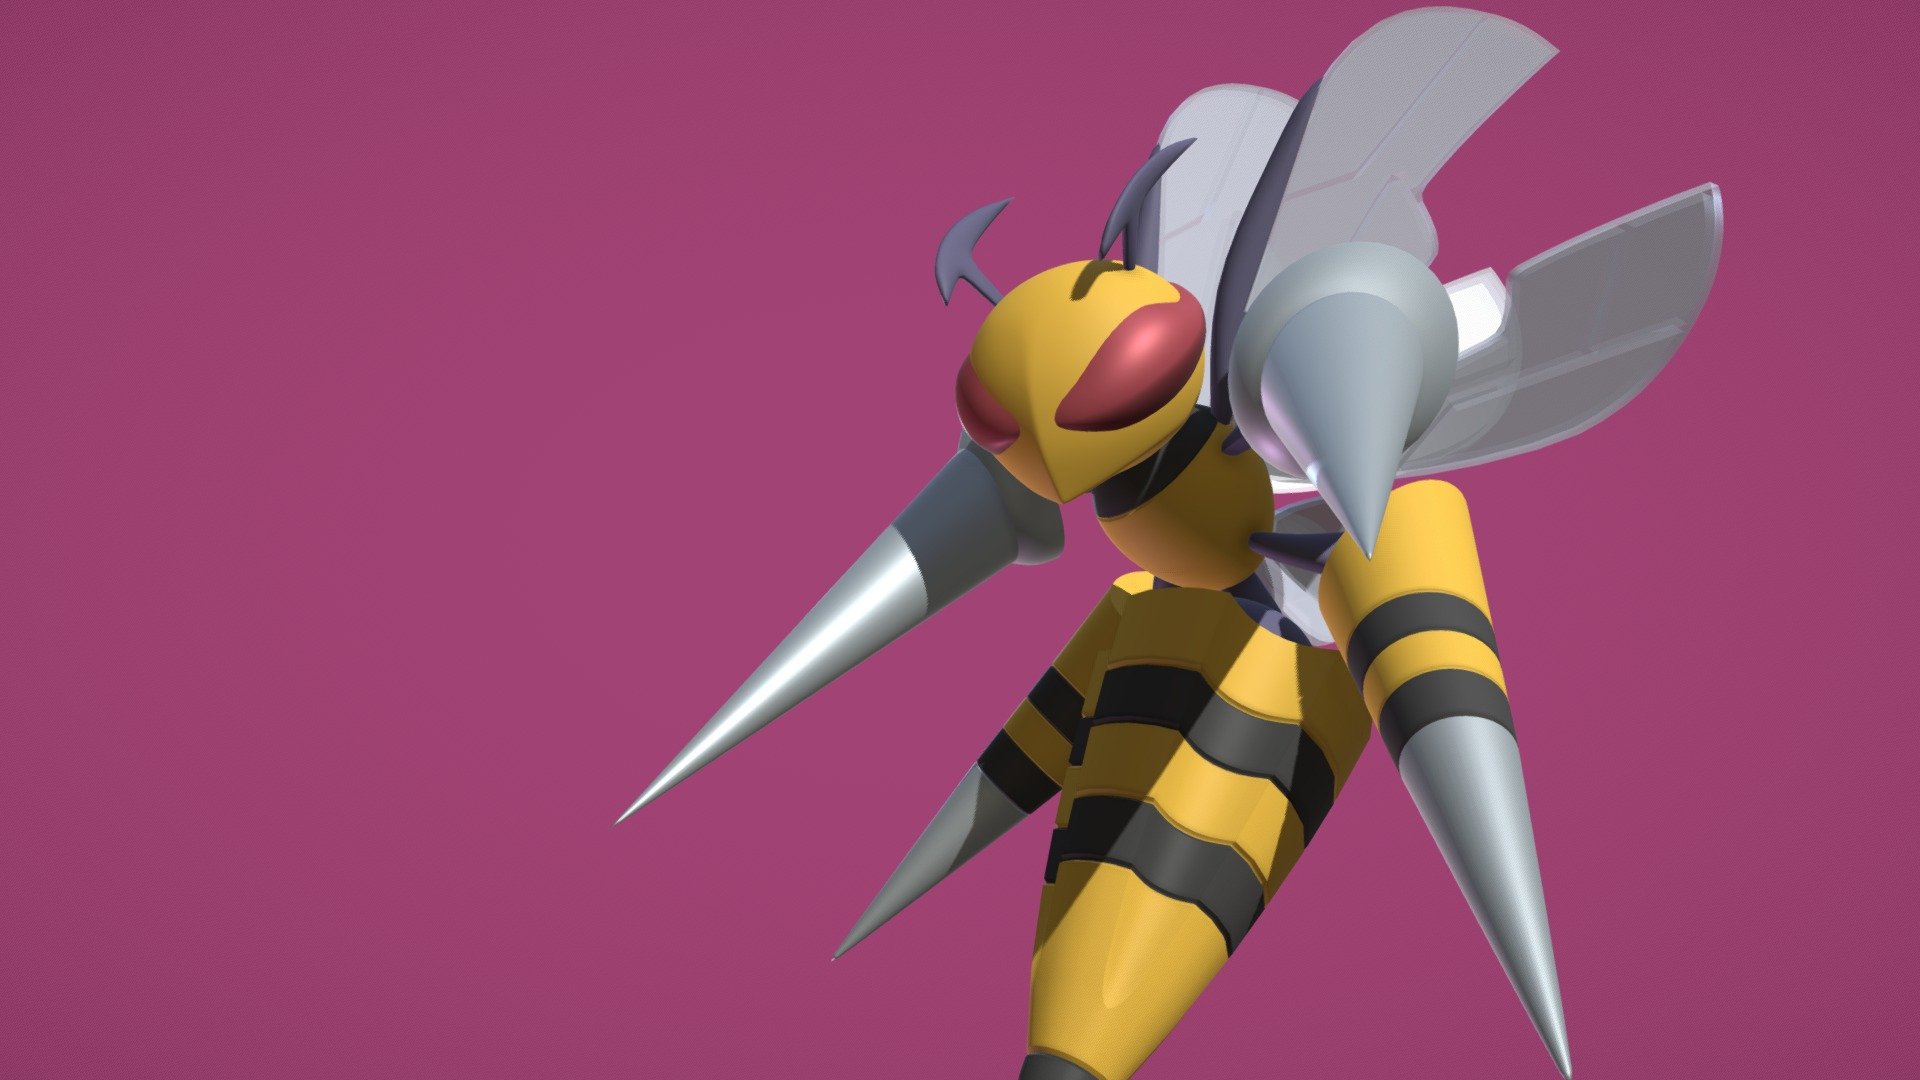 &ldquo;Beedrill is extremely territorial. No one should ever approach its nest—this is for their own safety. If angered, they will attack in a furious swarm.